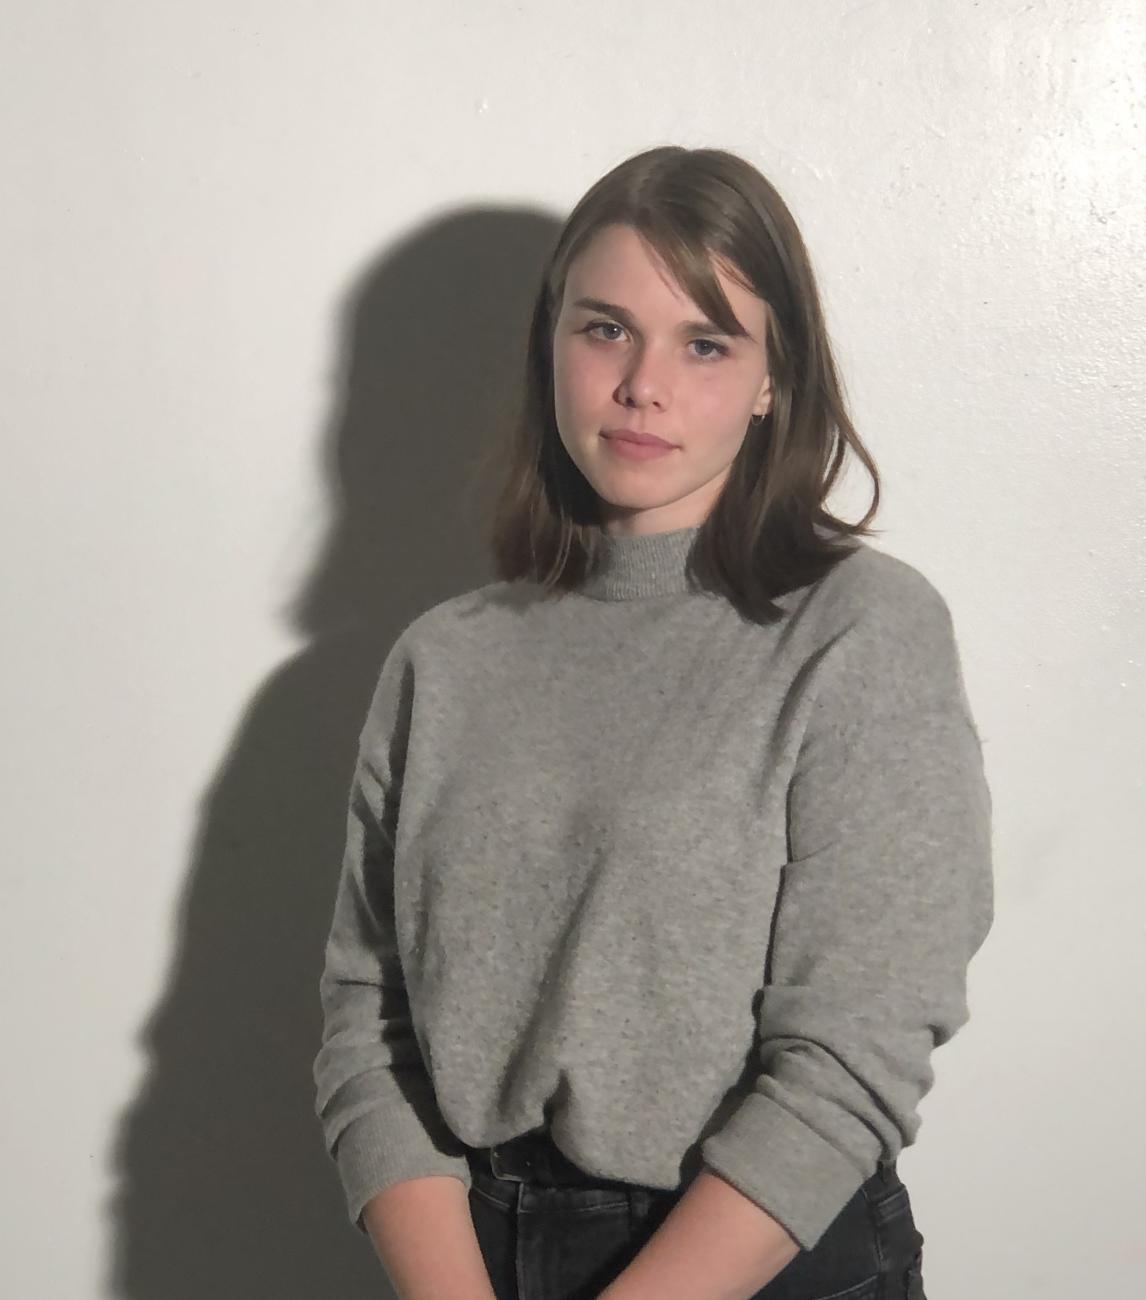 a young person with brown hair and a gray sweater